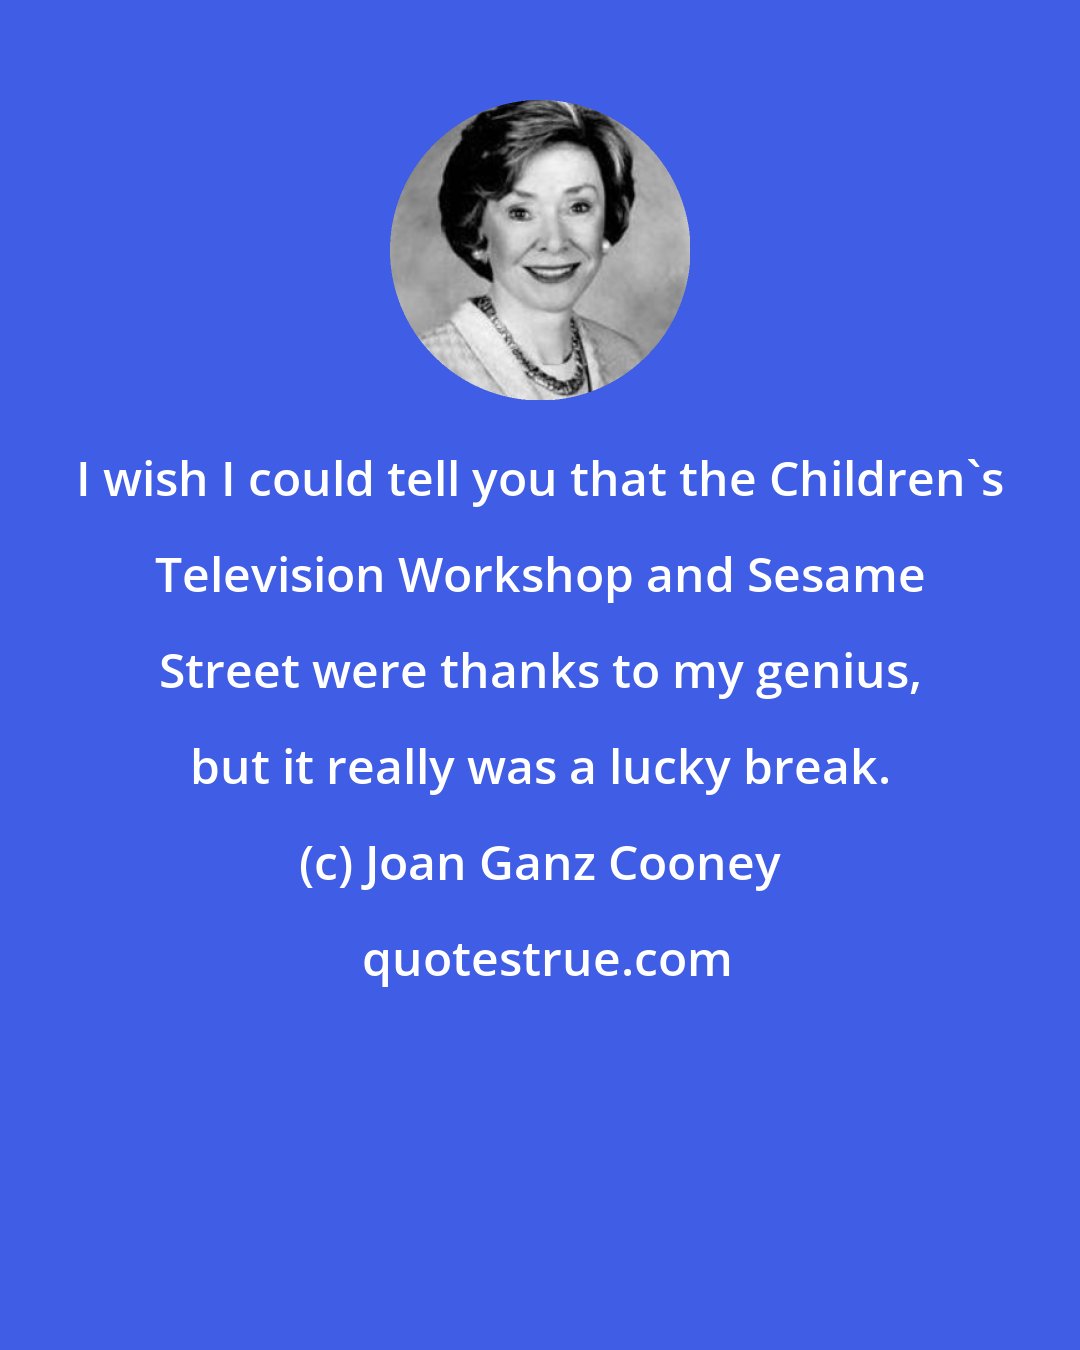 Joan Ganz Cooney: I wish I could tell you that the Children's Television Workshop and Sesame Street were thanks to my genius, but it really was a lucky break.